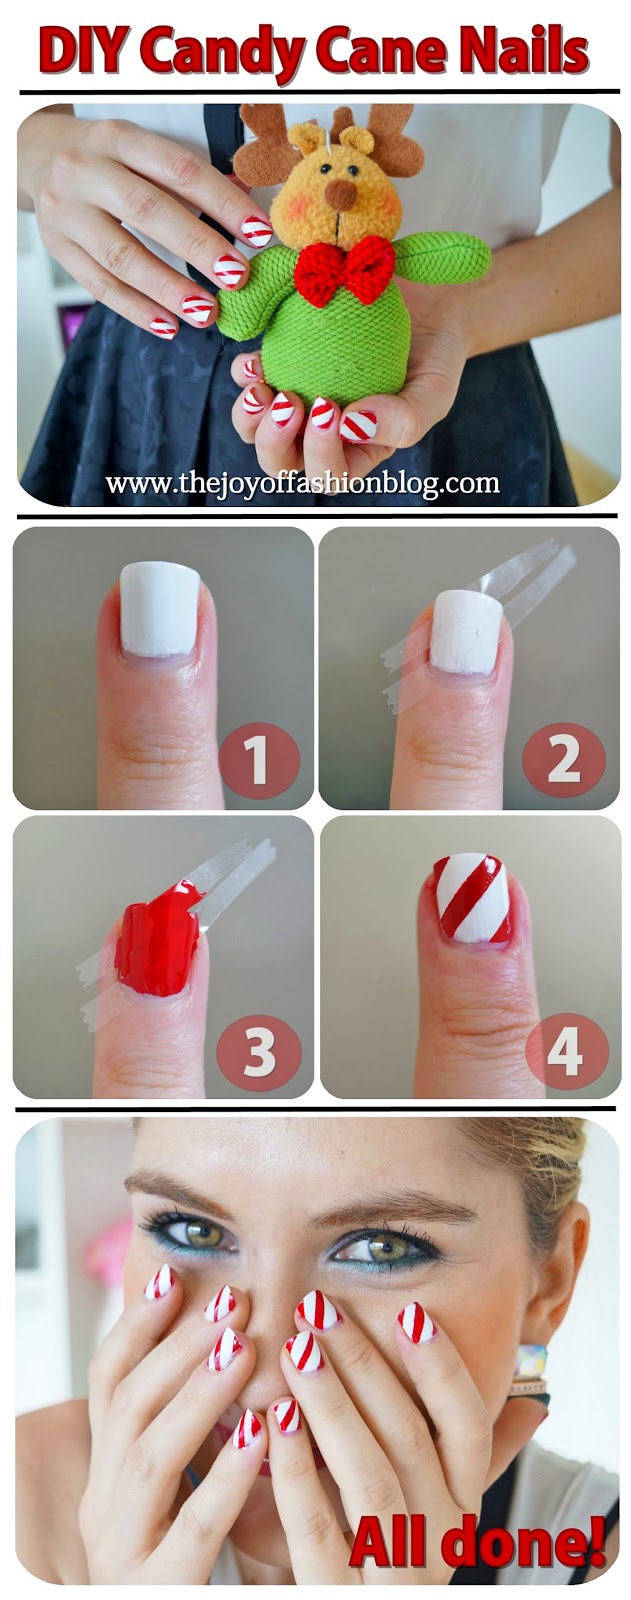 Cute candy cane nails tutorial for Christmas